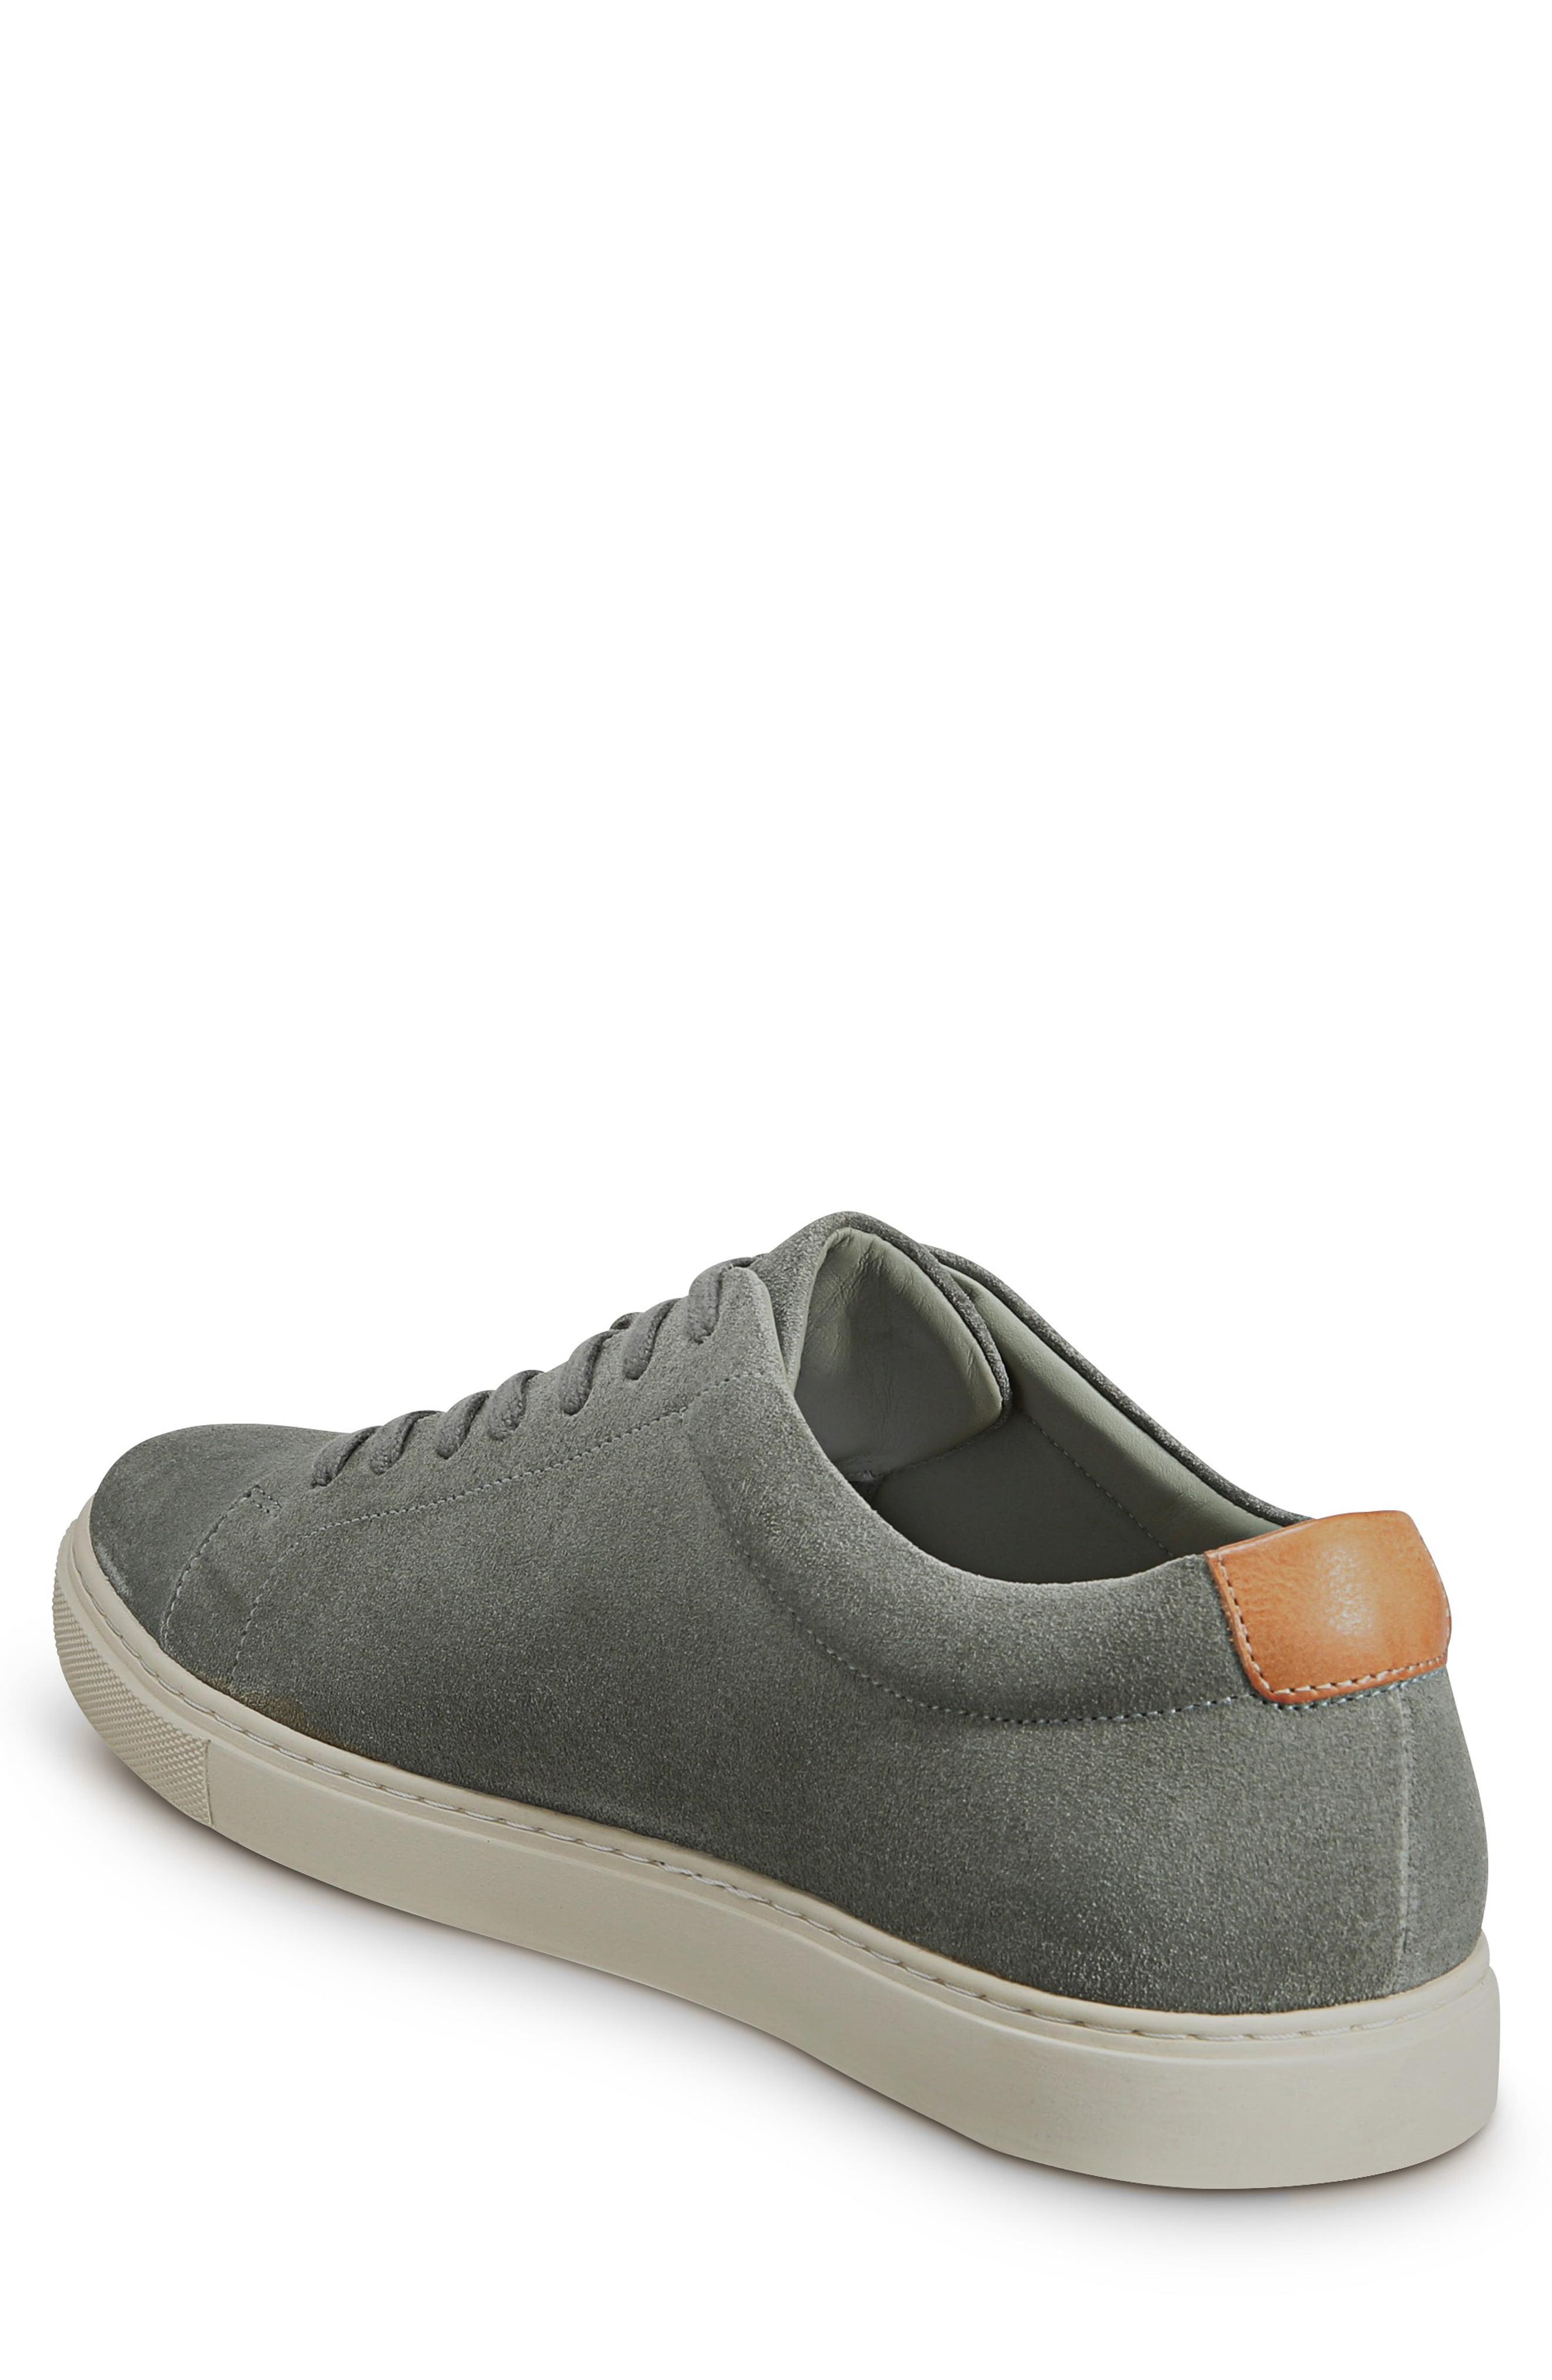 canal court suede sneaker